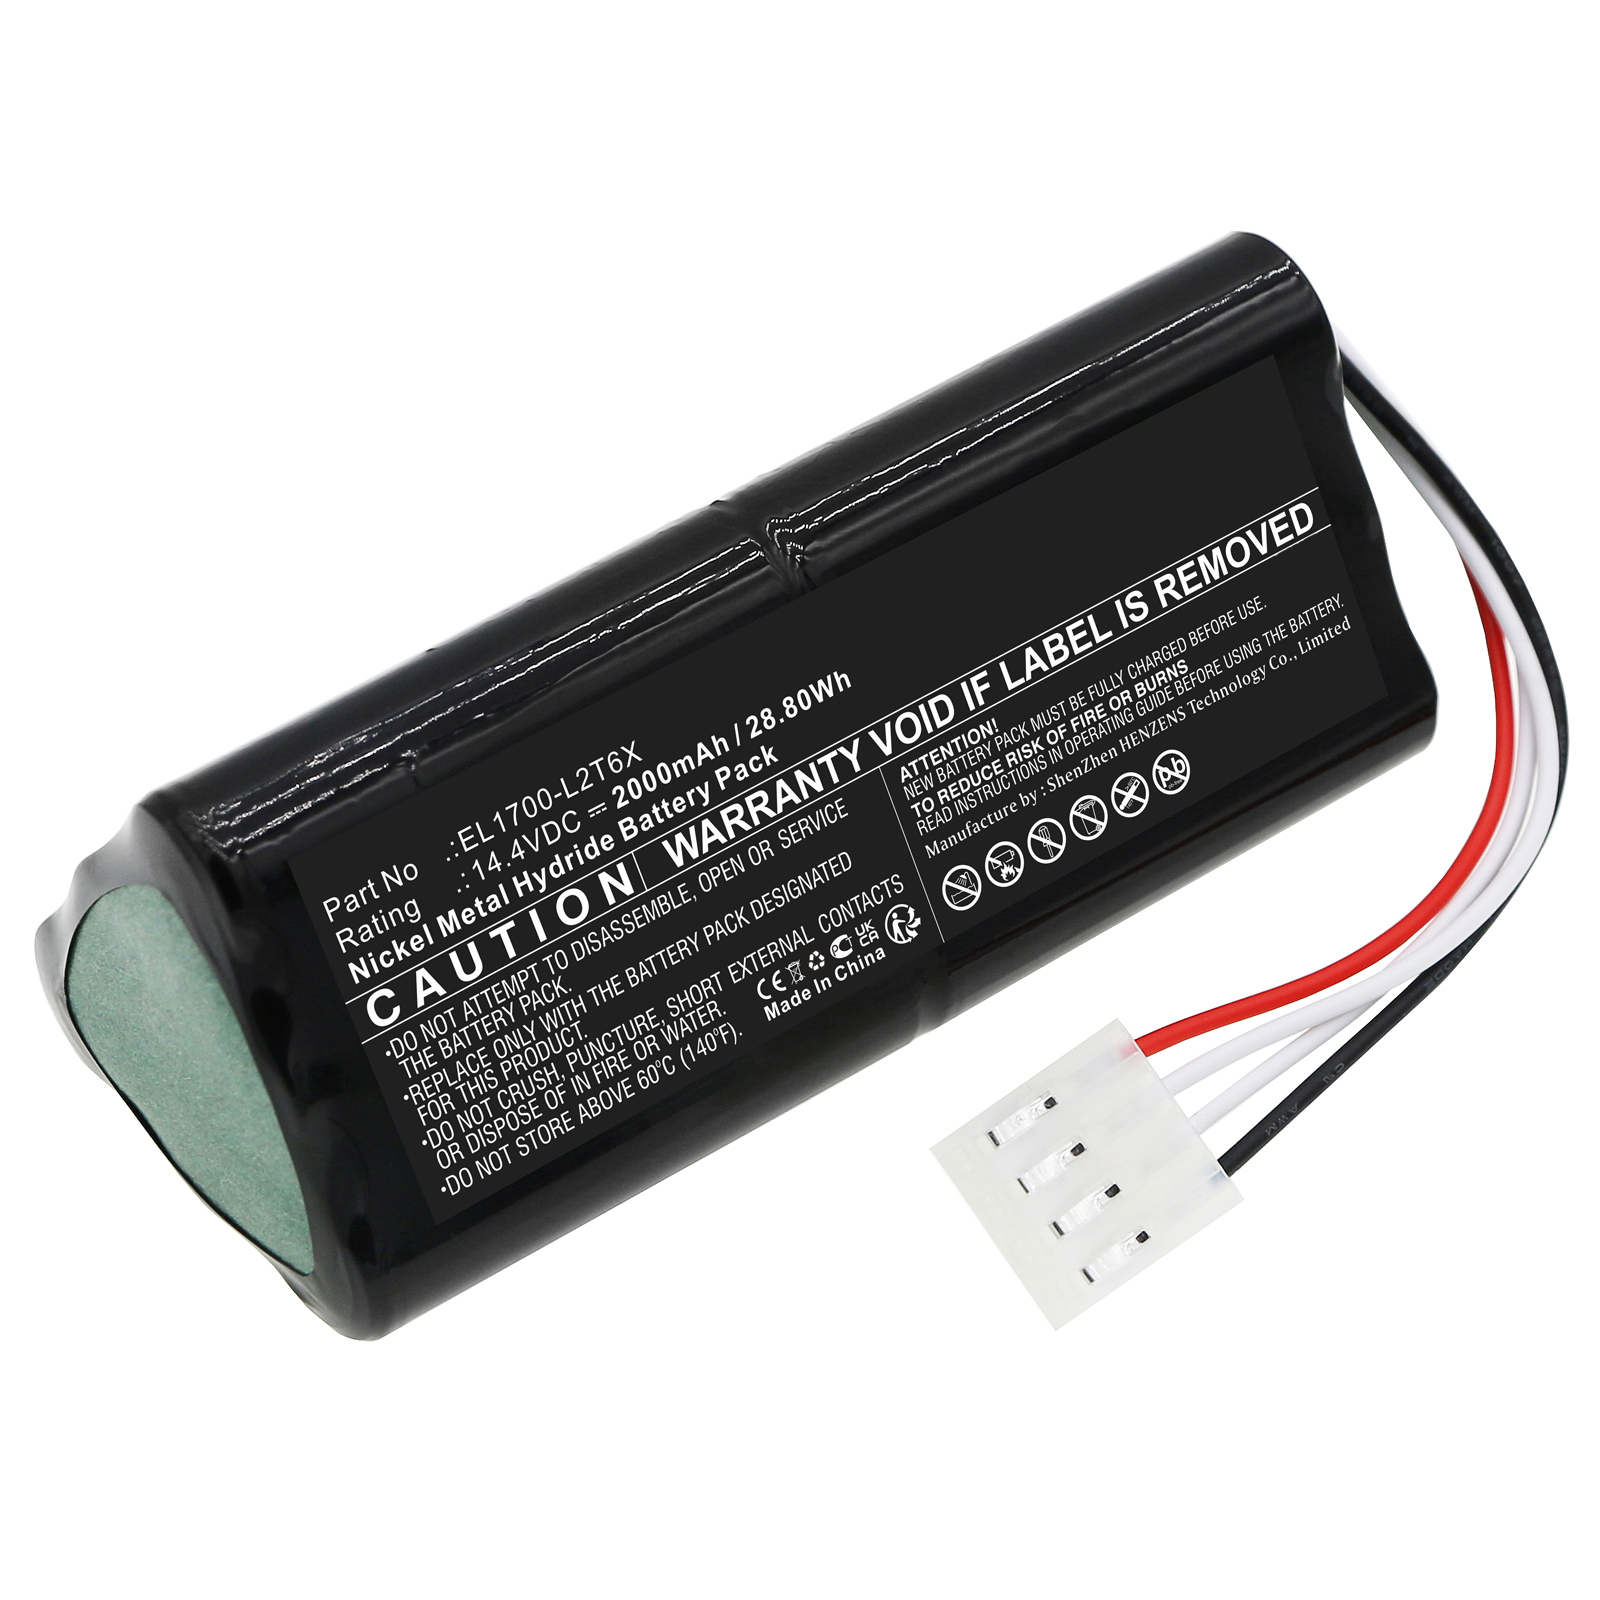 Synergy Digital Medical Battery, Compatible with Amico EL1700-L2T6X Medical Battery (Ni-MH, 14.4V, 2000mAh)